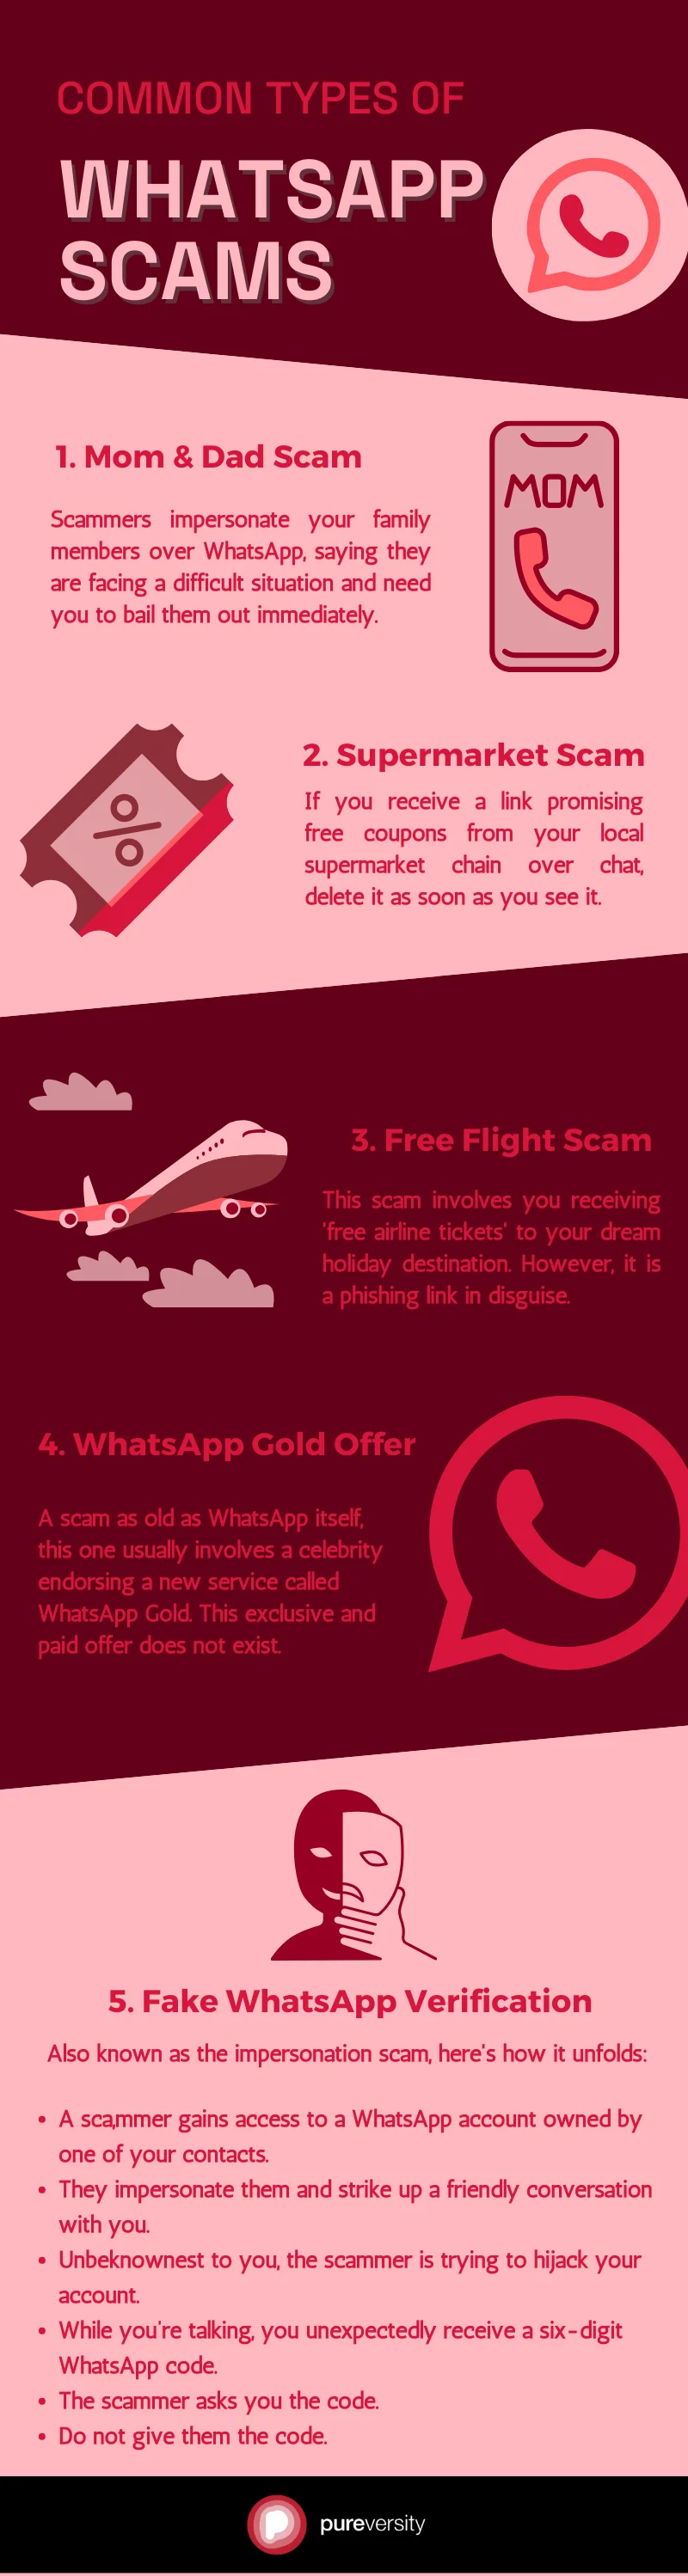 A list of Whatsapp Scams you are likely to encounter